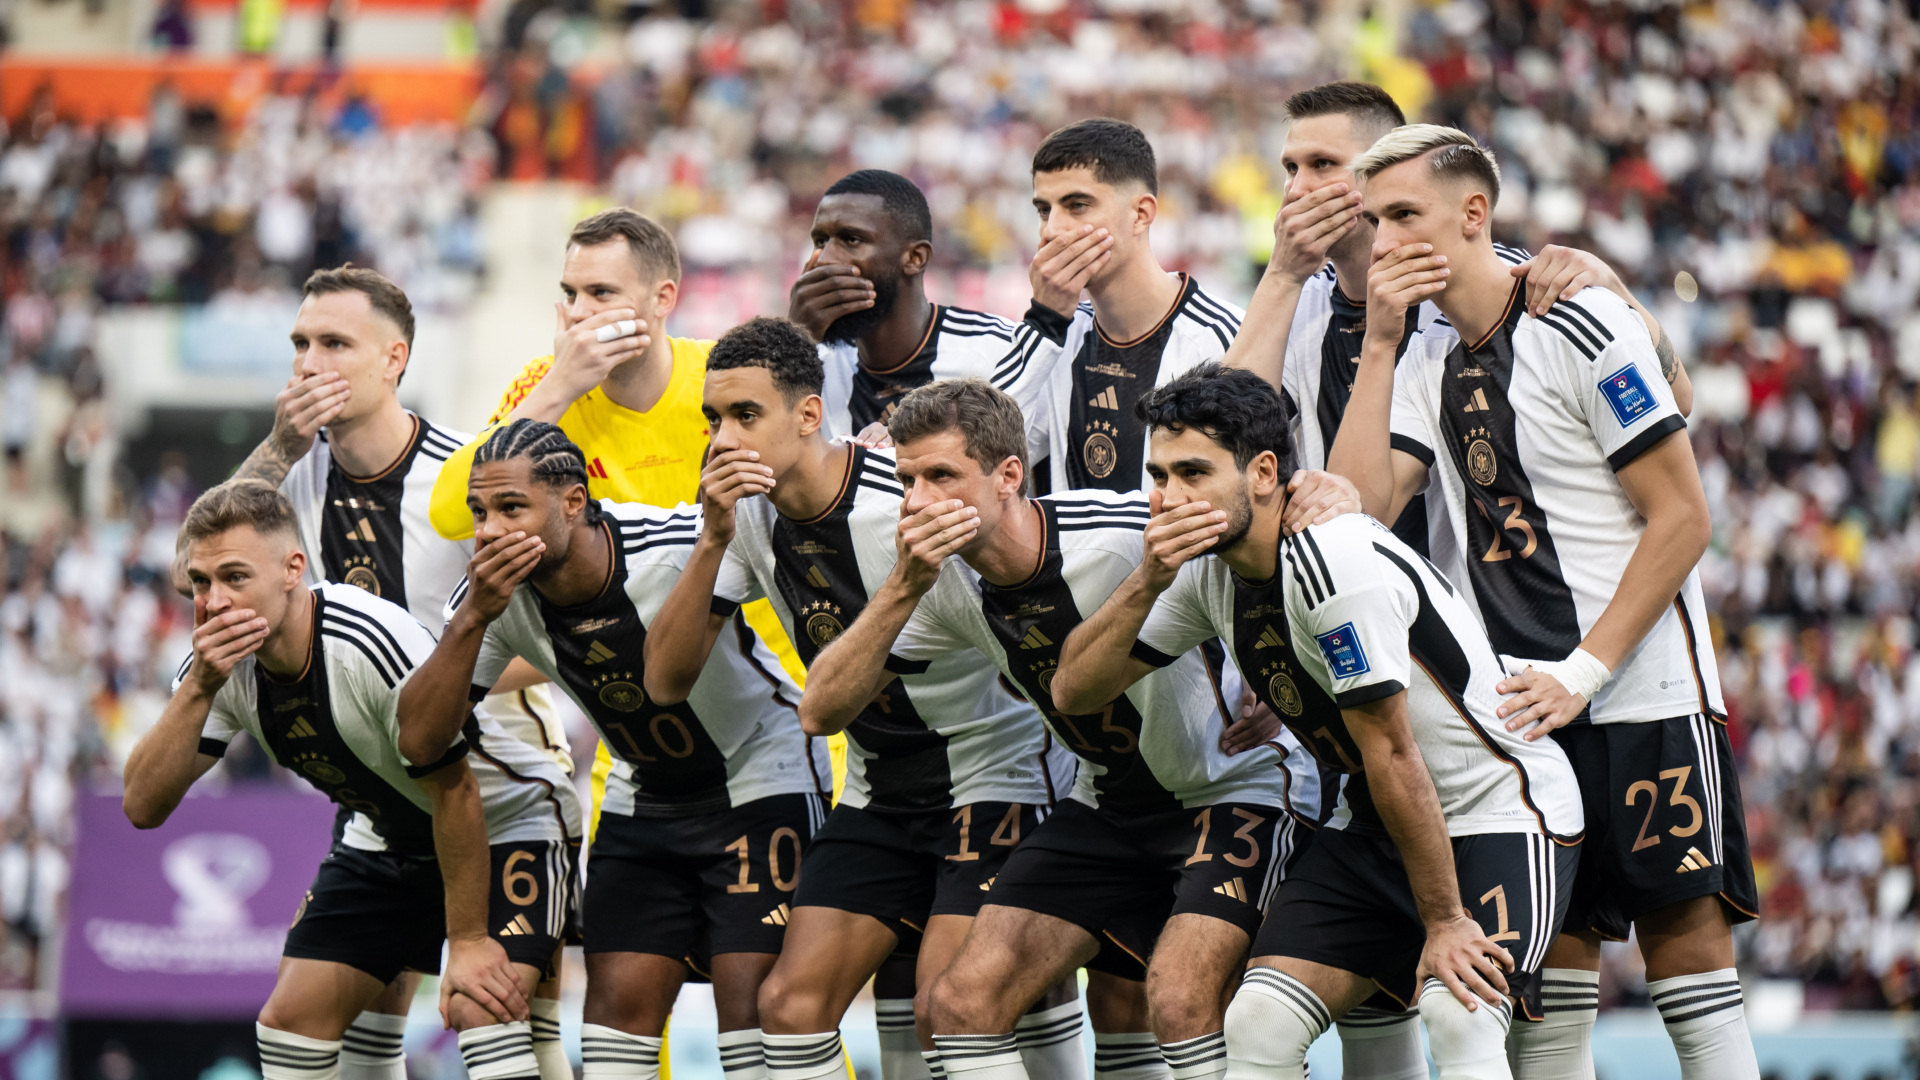 DOHA, QATAR - NOVEMBER 23: Team of Germany protests against FIFA during their team picture prior the FIFA World Cup Qatar 2022 Group E match between Germany and Japan at Khalifa International Stadium on November 23, 2022 in Doha, Qatar. (Photo by Marvin Ibo Guengoer - GES Sportfoto/Getty Images)